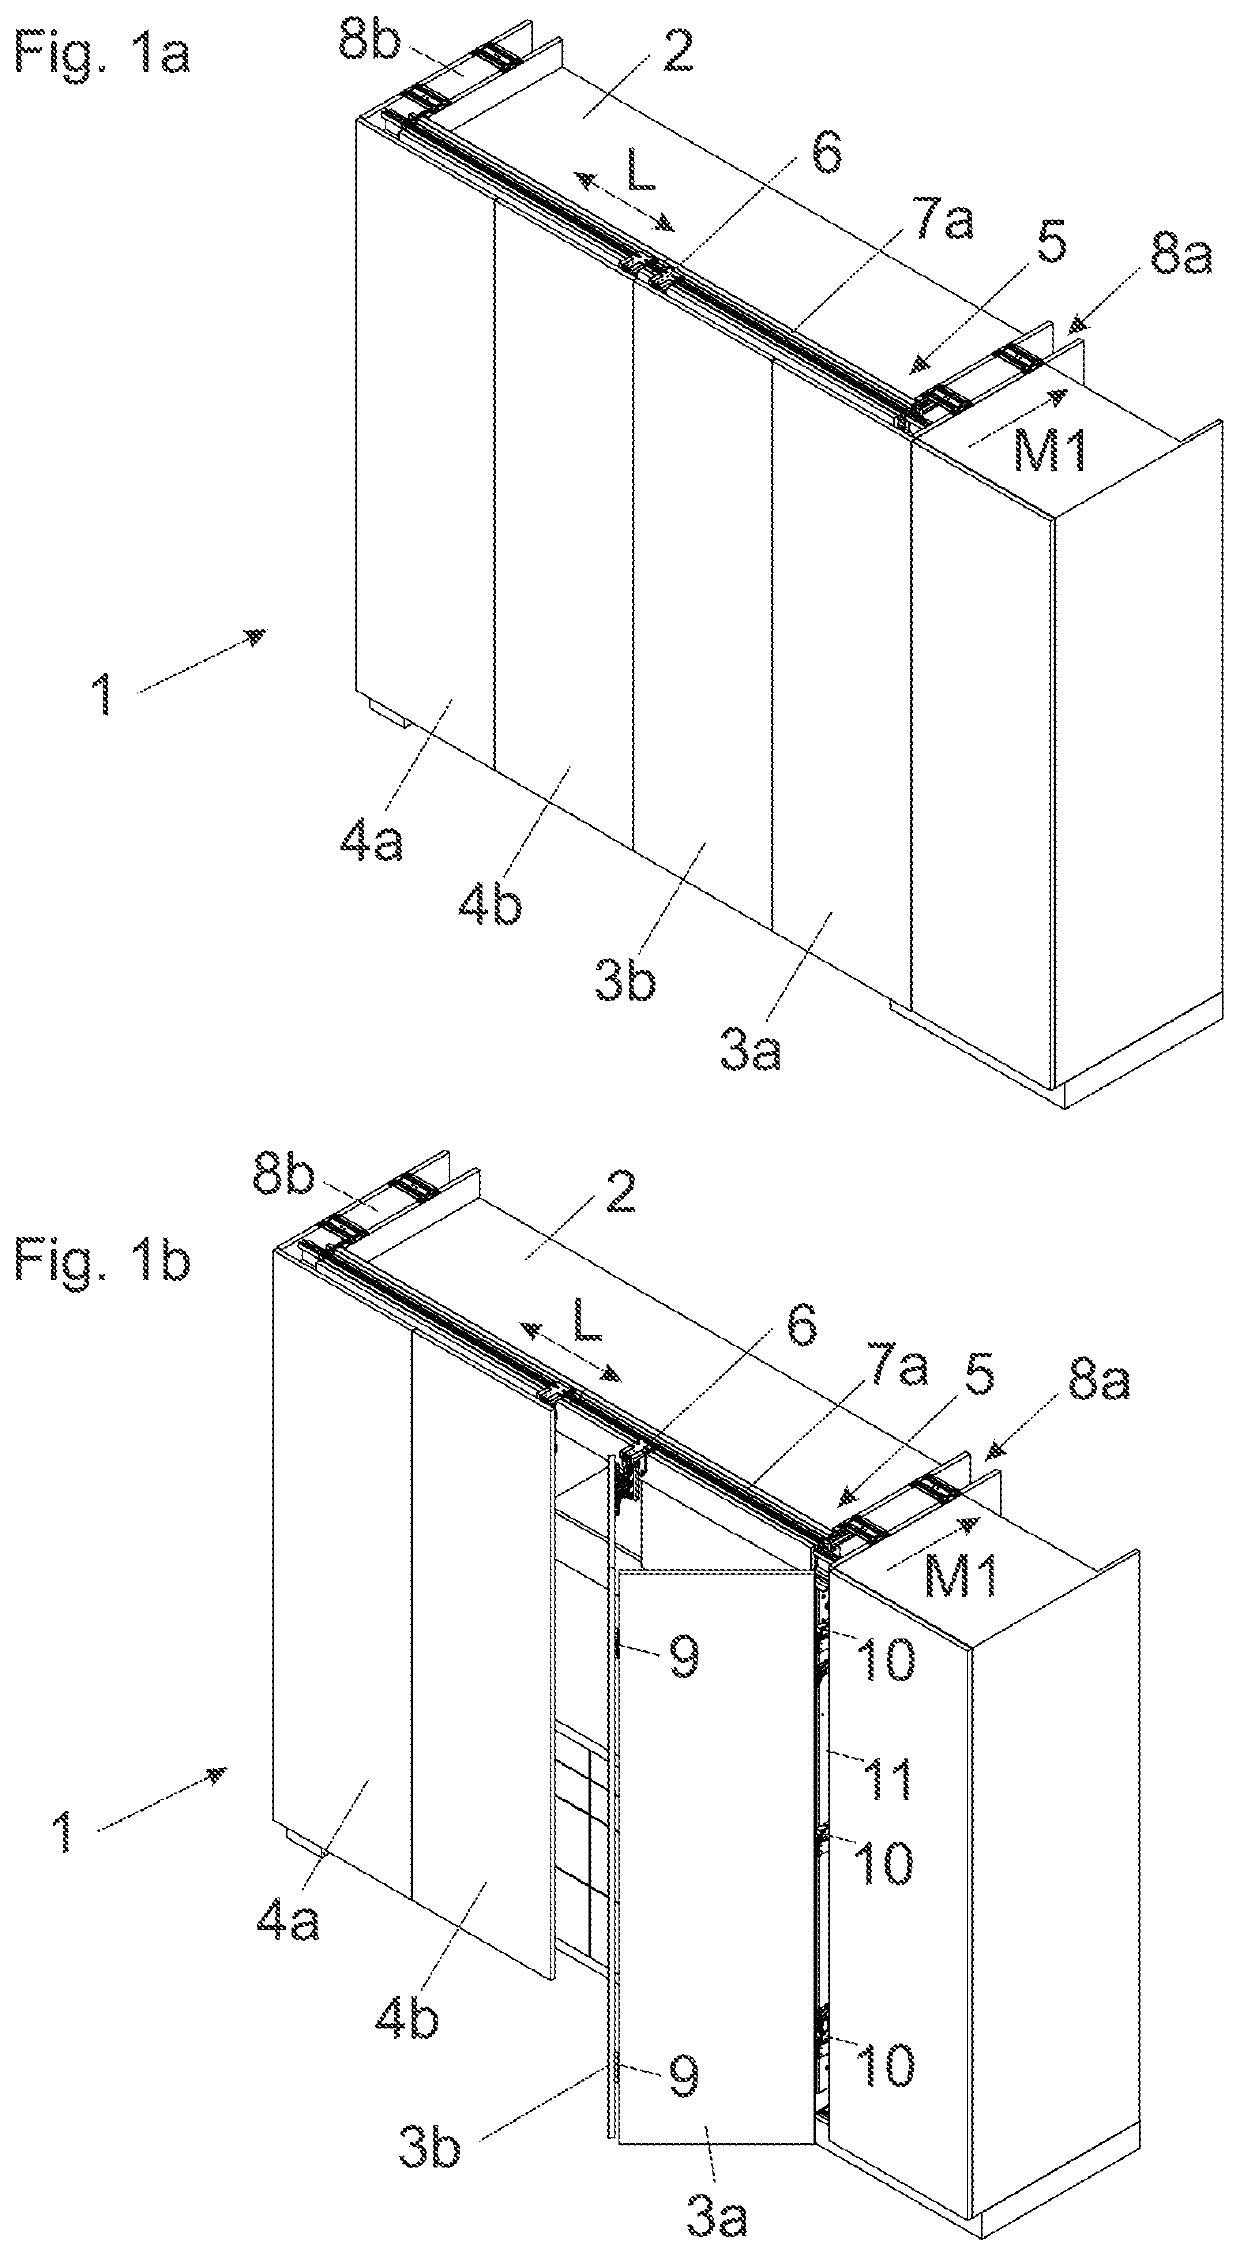 Control cam assembly for controlling a movement of a furniture part